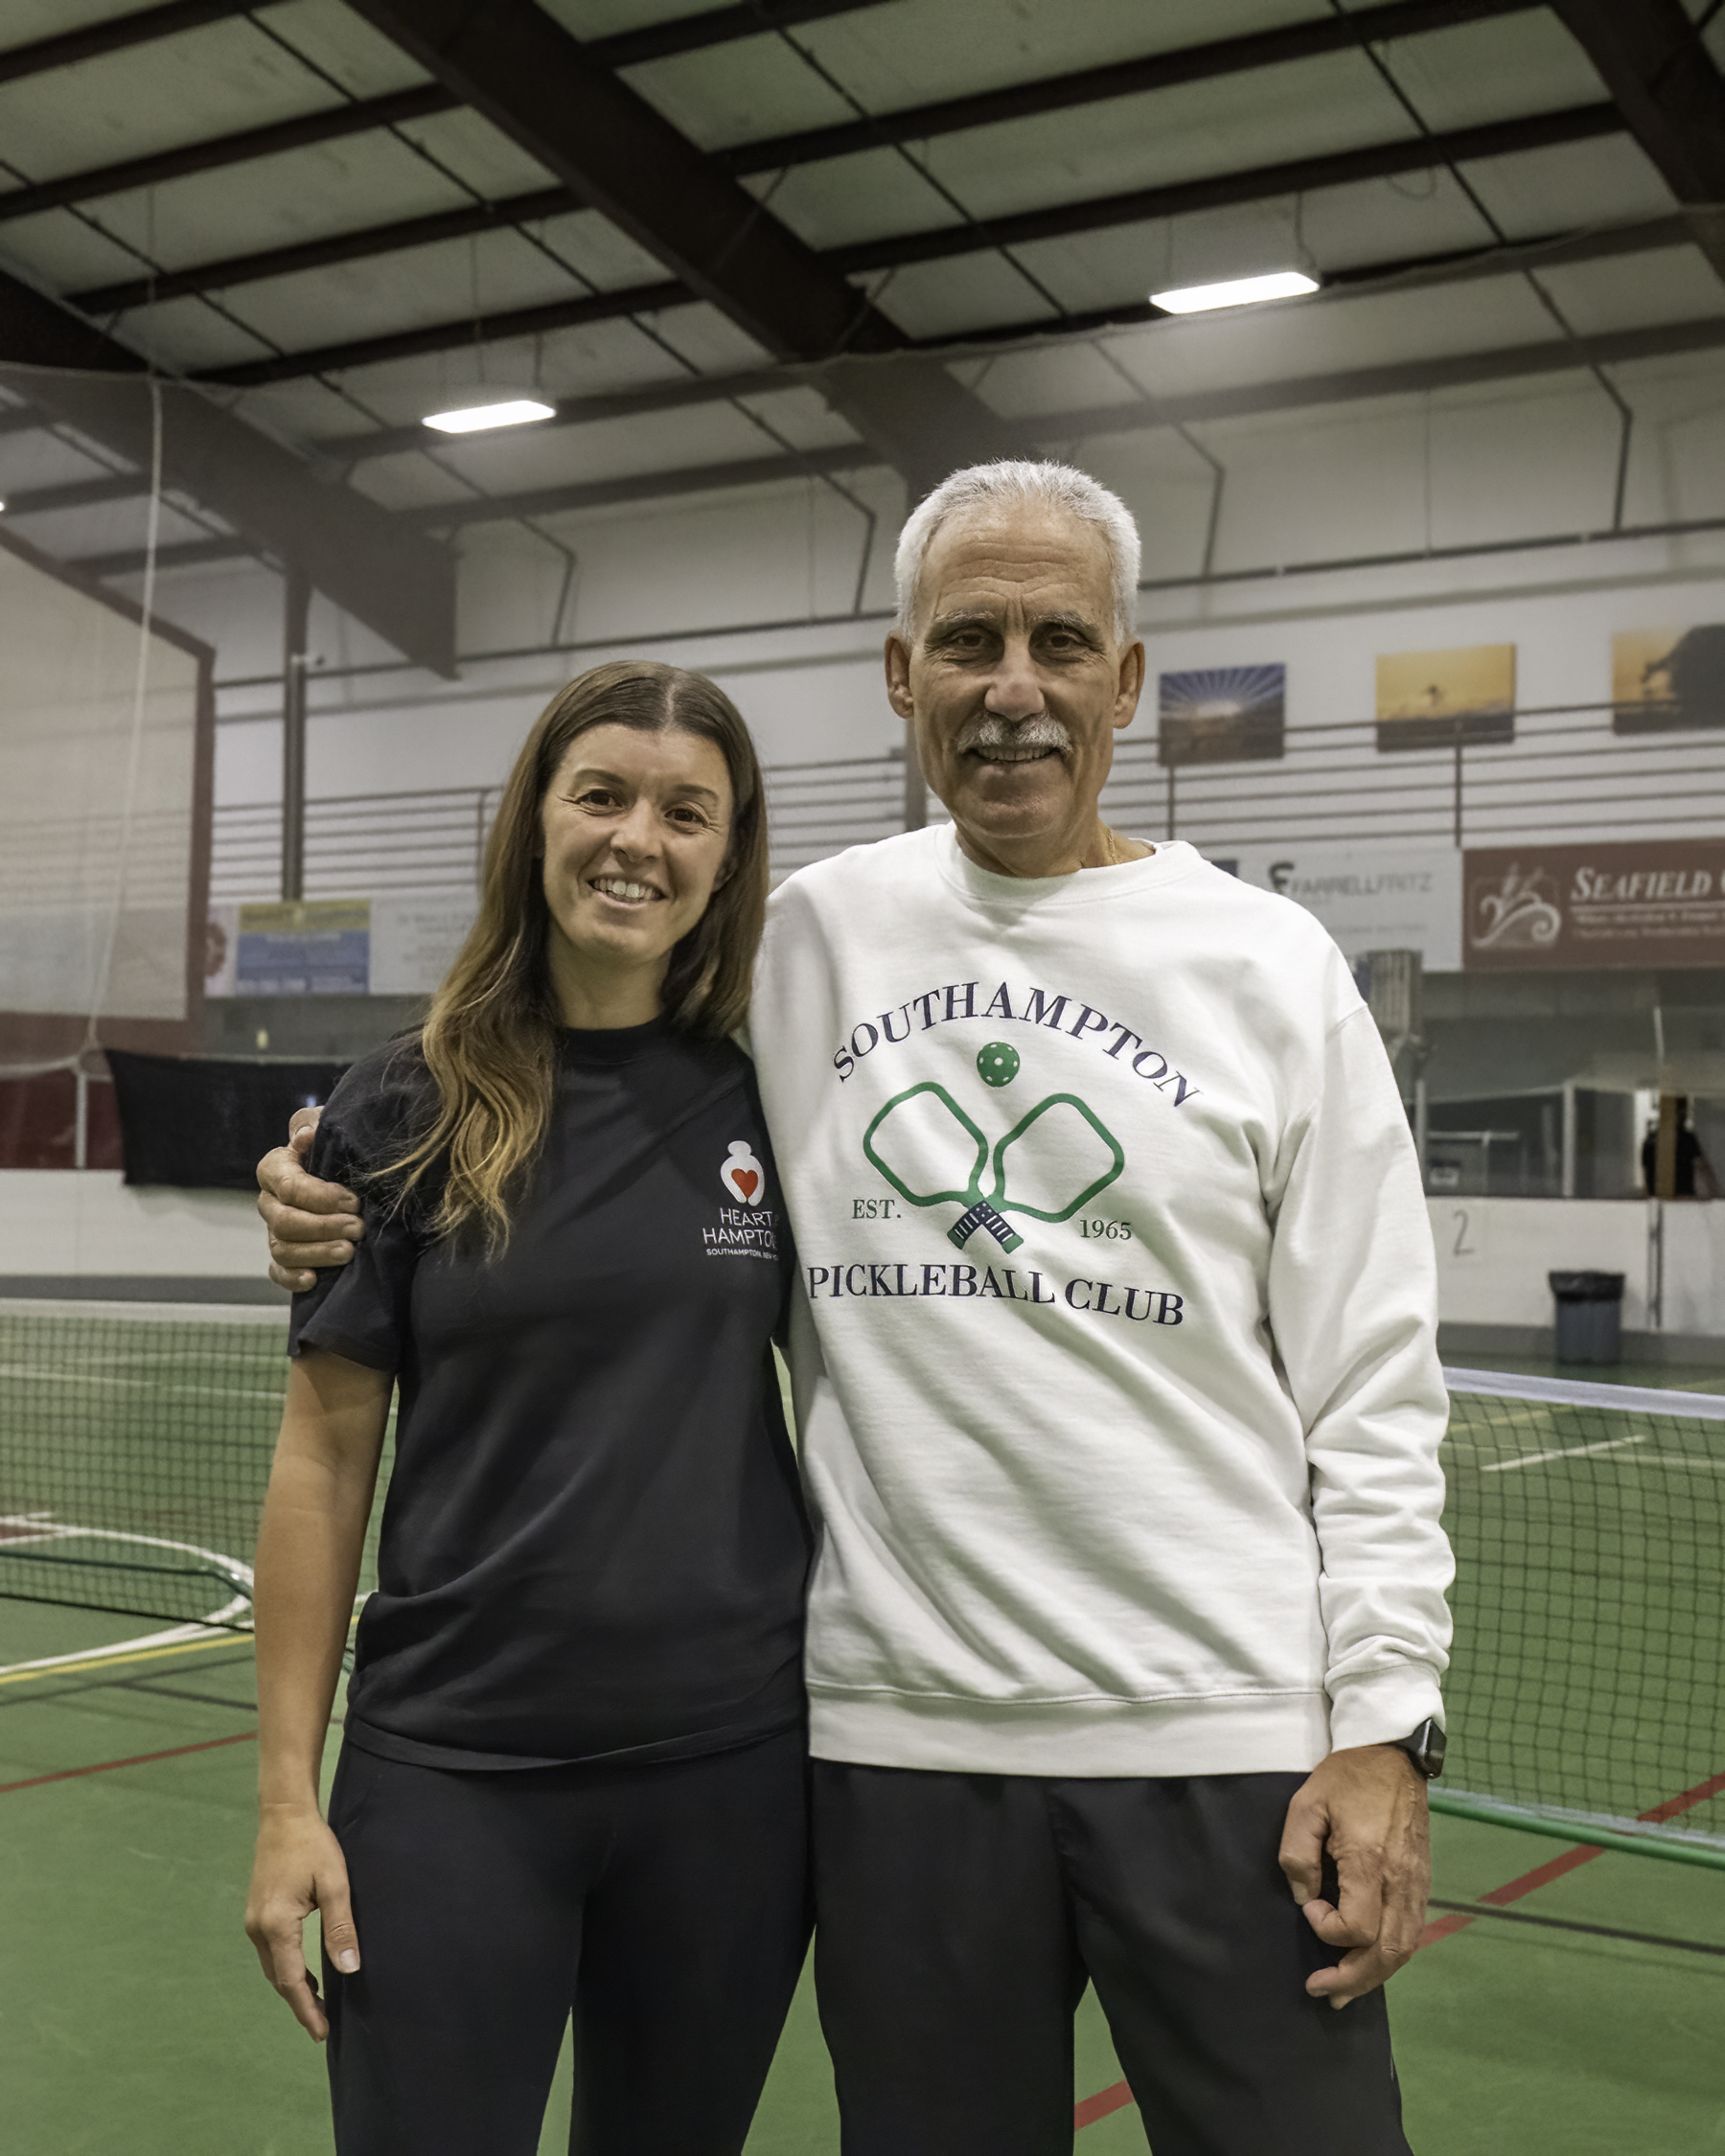 Heart of the Hamptons Executive Director Molly Bishop and Vinny Mangano, who runs Southampton Pickleball Club and is the USA Pickleball Ambassador for the North Mid-Atlantic region.   MARIANNE BARNETT